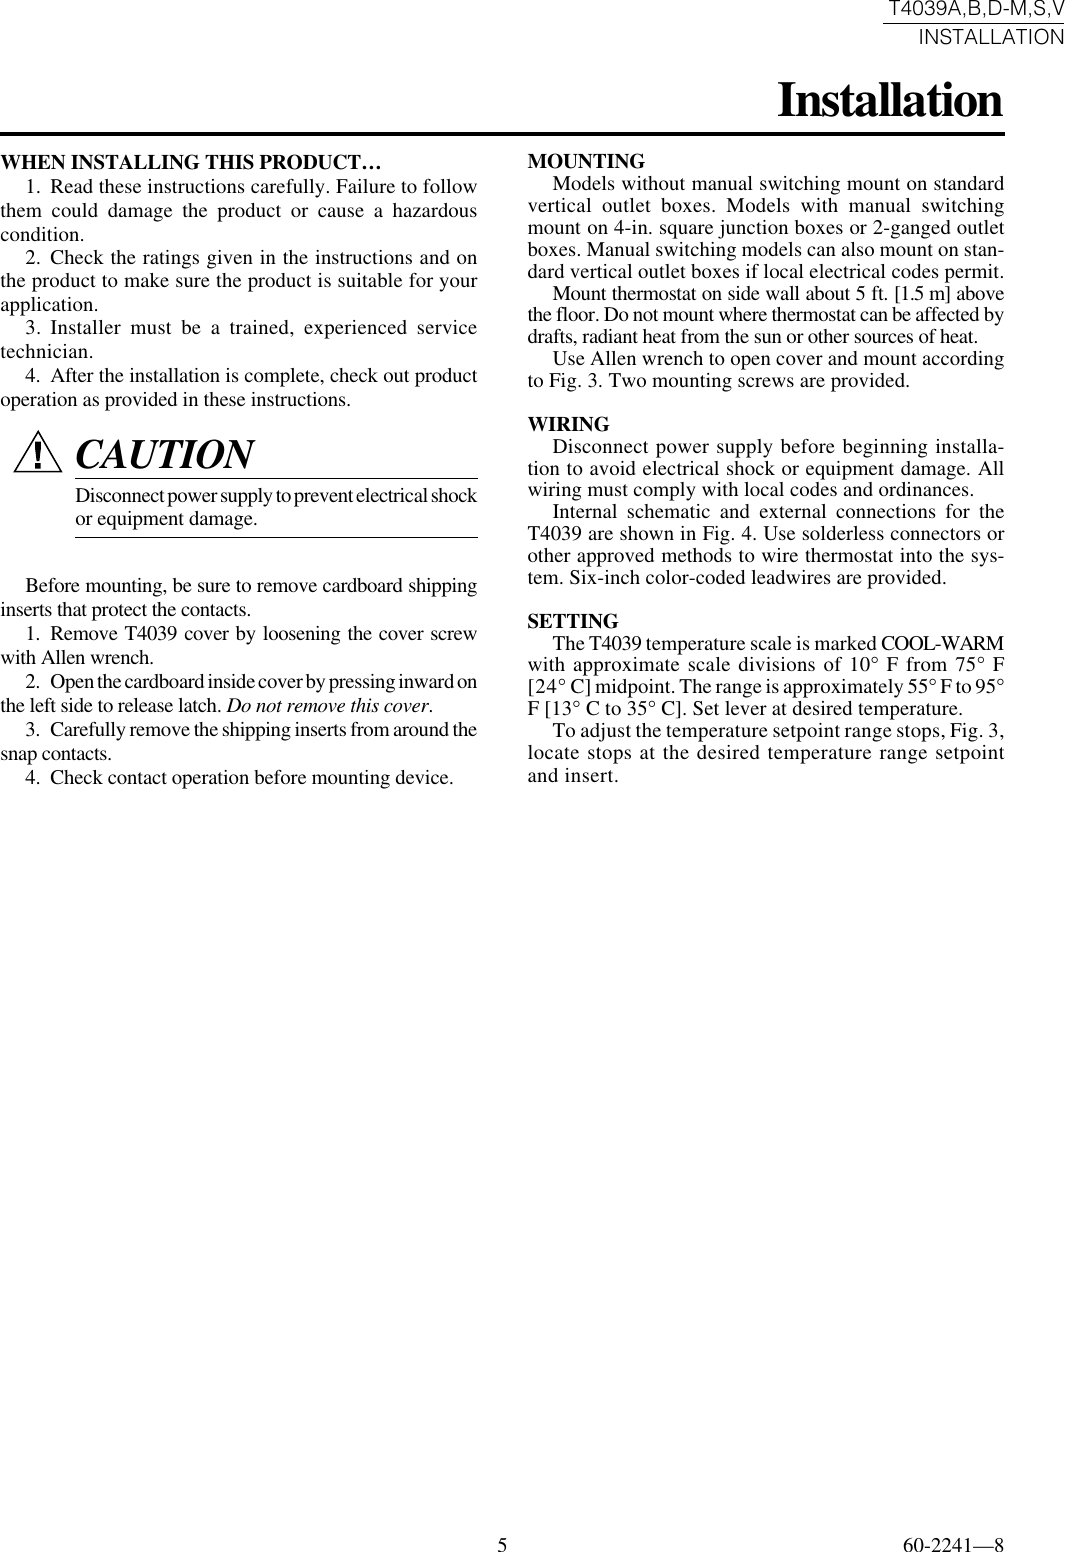 Page 5 of 8 - Honeywell Honeywell-T4039A-Users-Manual- 60-2241 - T4039A,B,D-M,S,V Line Voltage Cooling And Heating-Cooling Thermostats  Honeywell-t4039a-users-manual